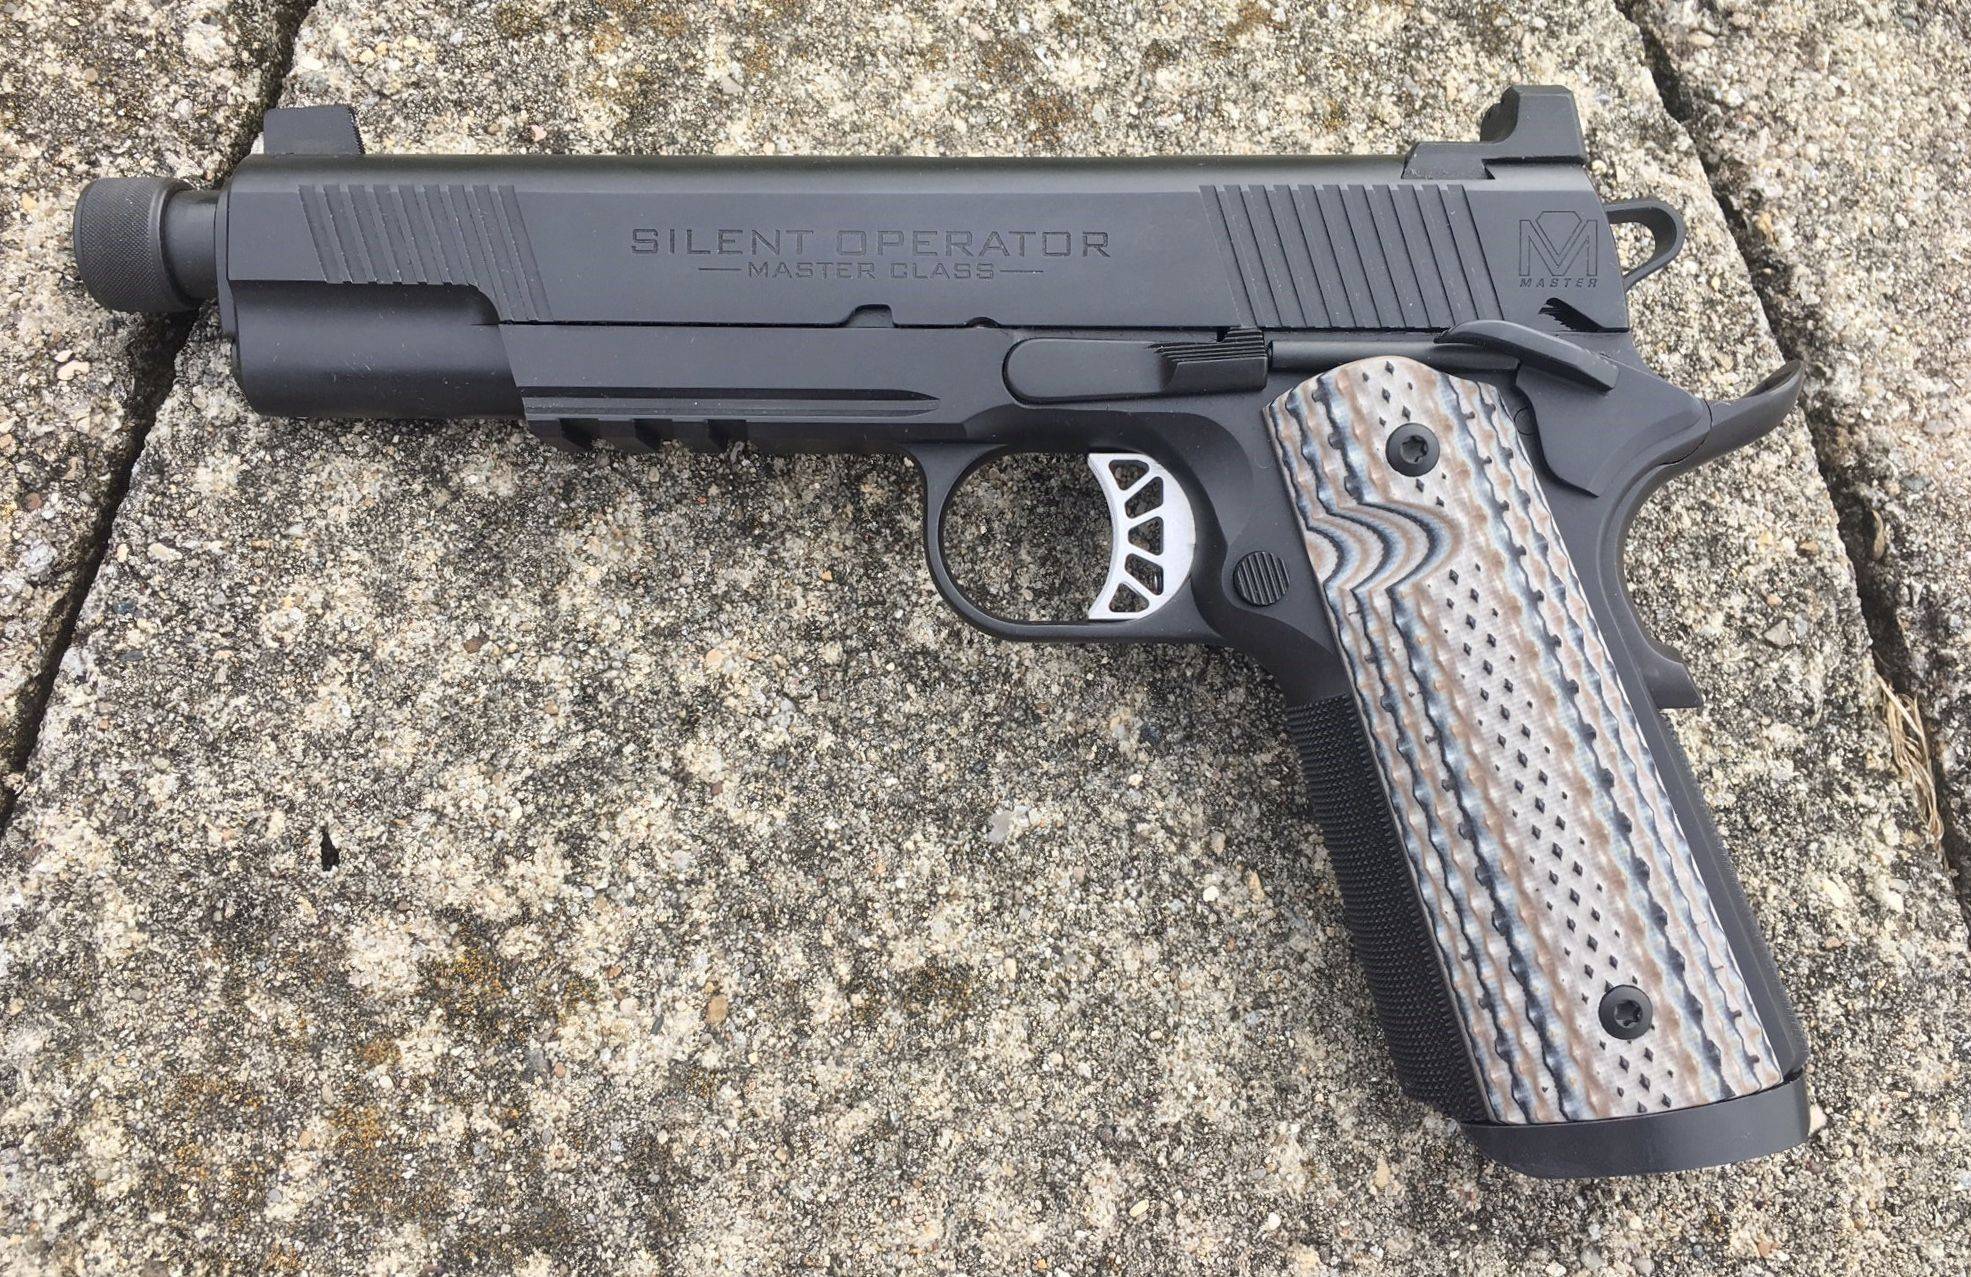 Springfield armory 1911 series - internet movie firearms database - guns in movies, tv and video games